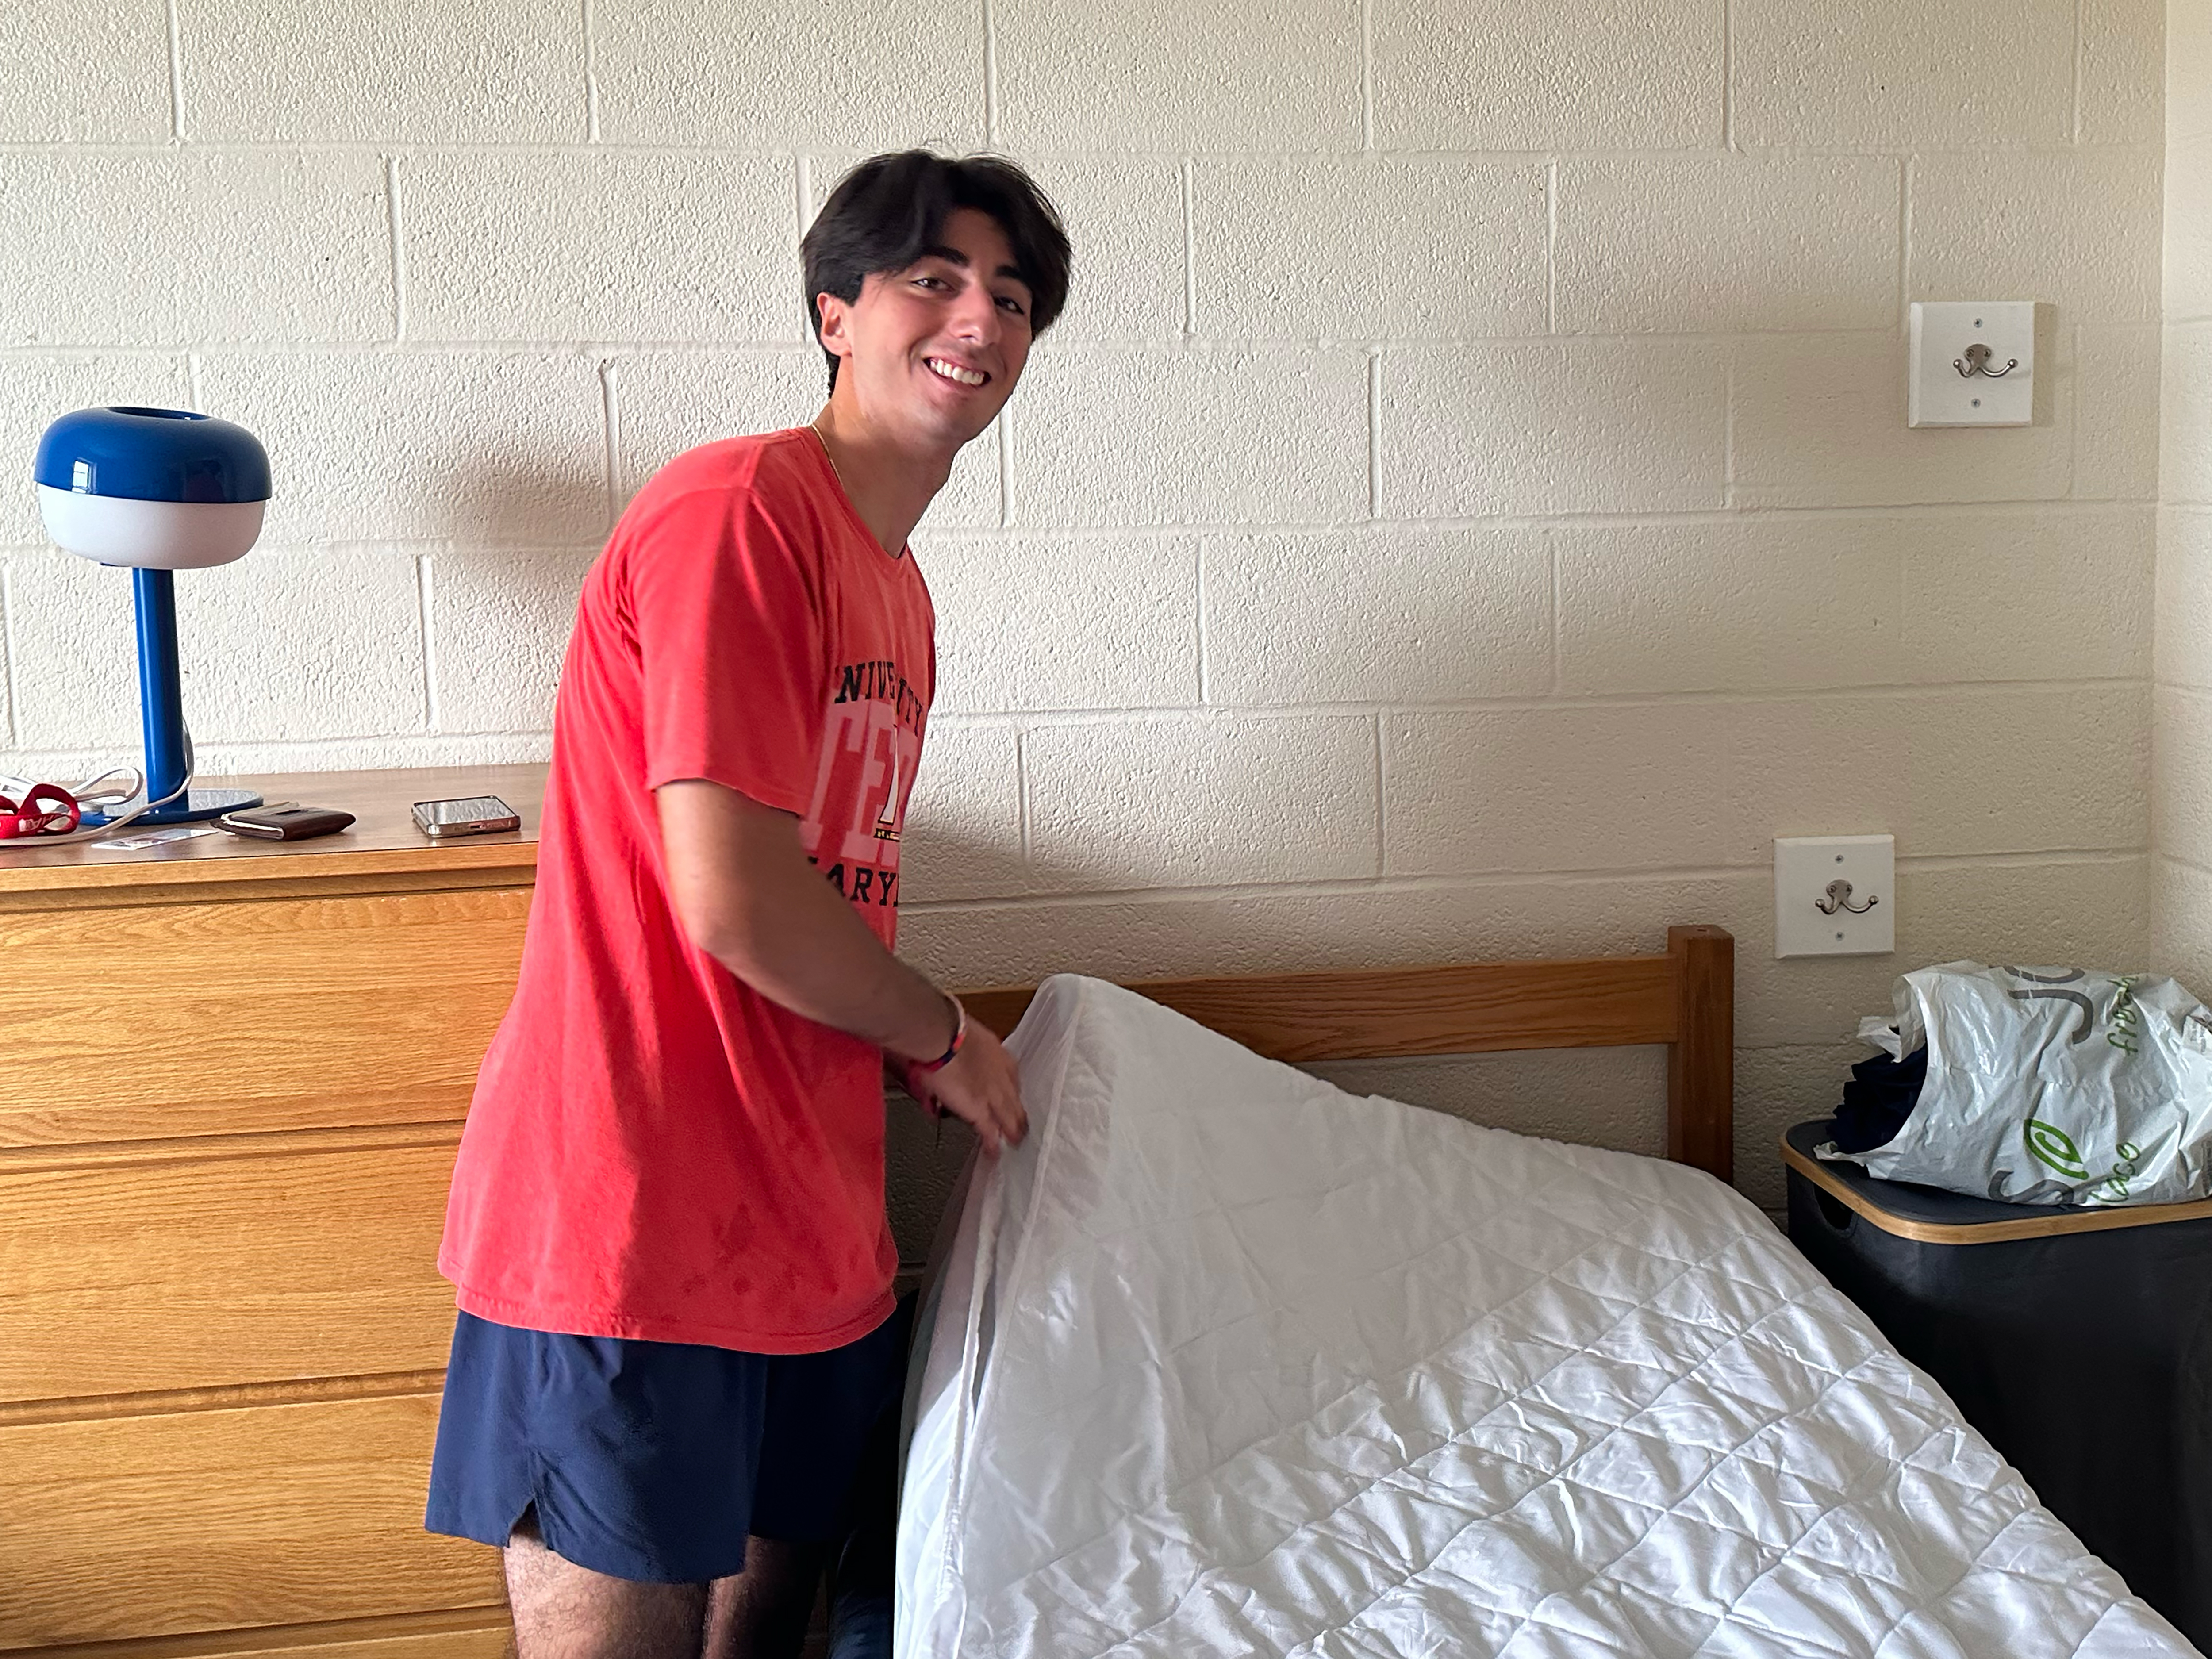 BioFIRE student making his bed in Easton Hall